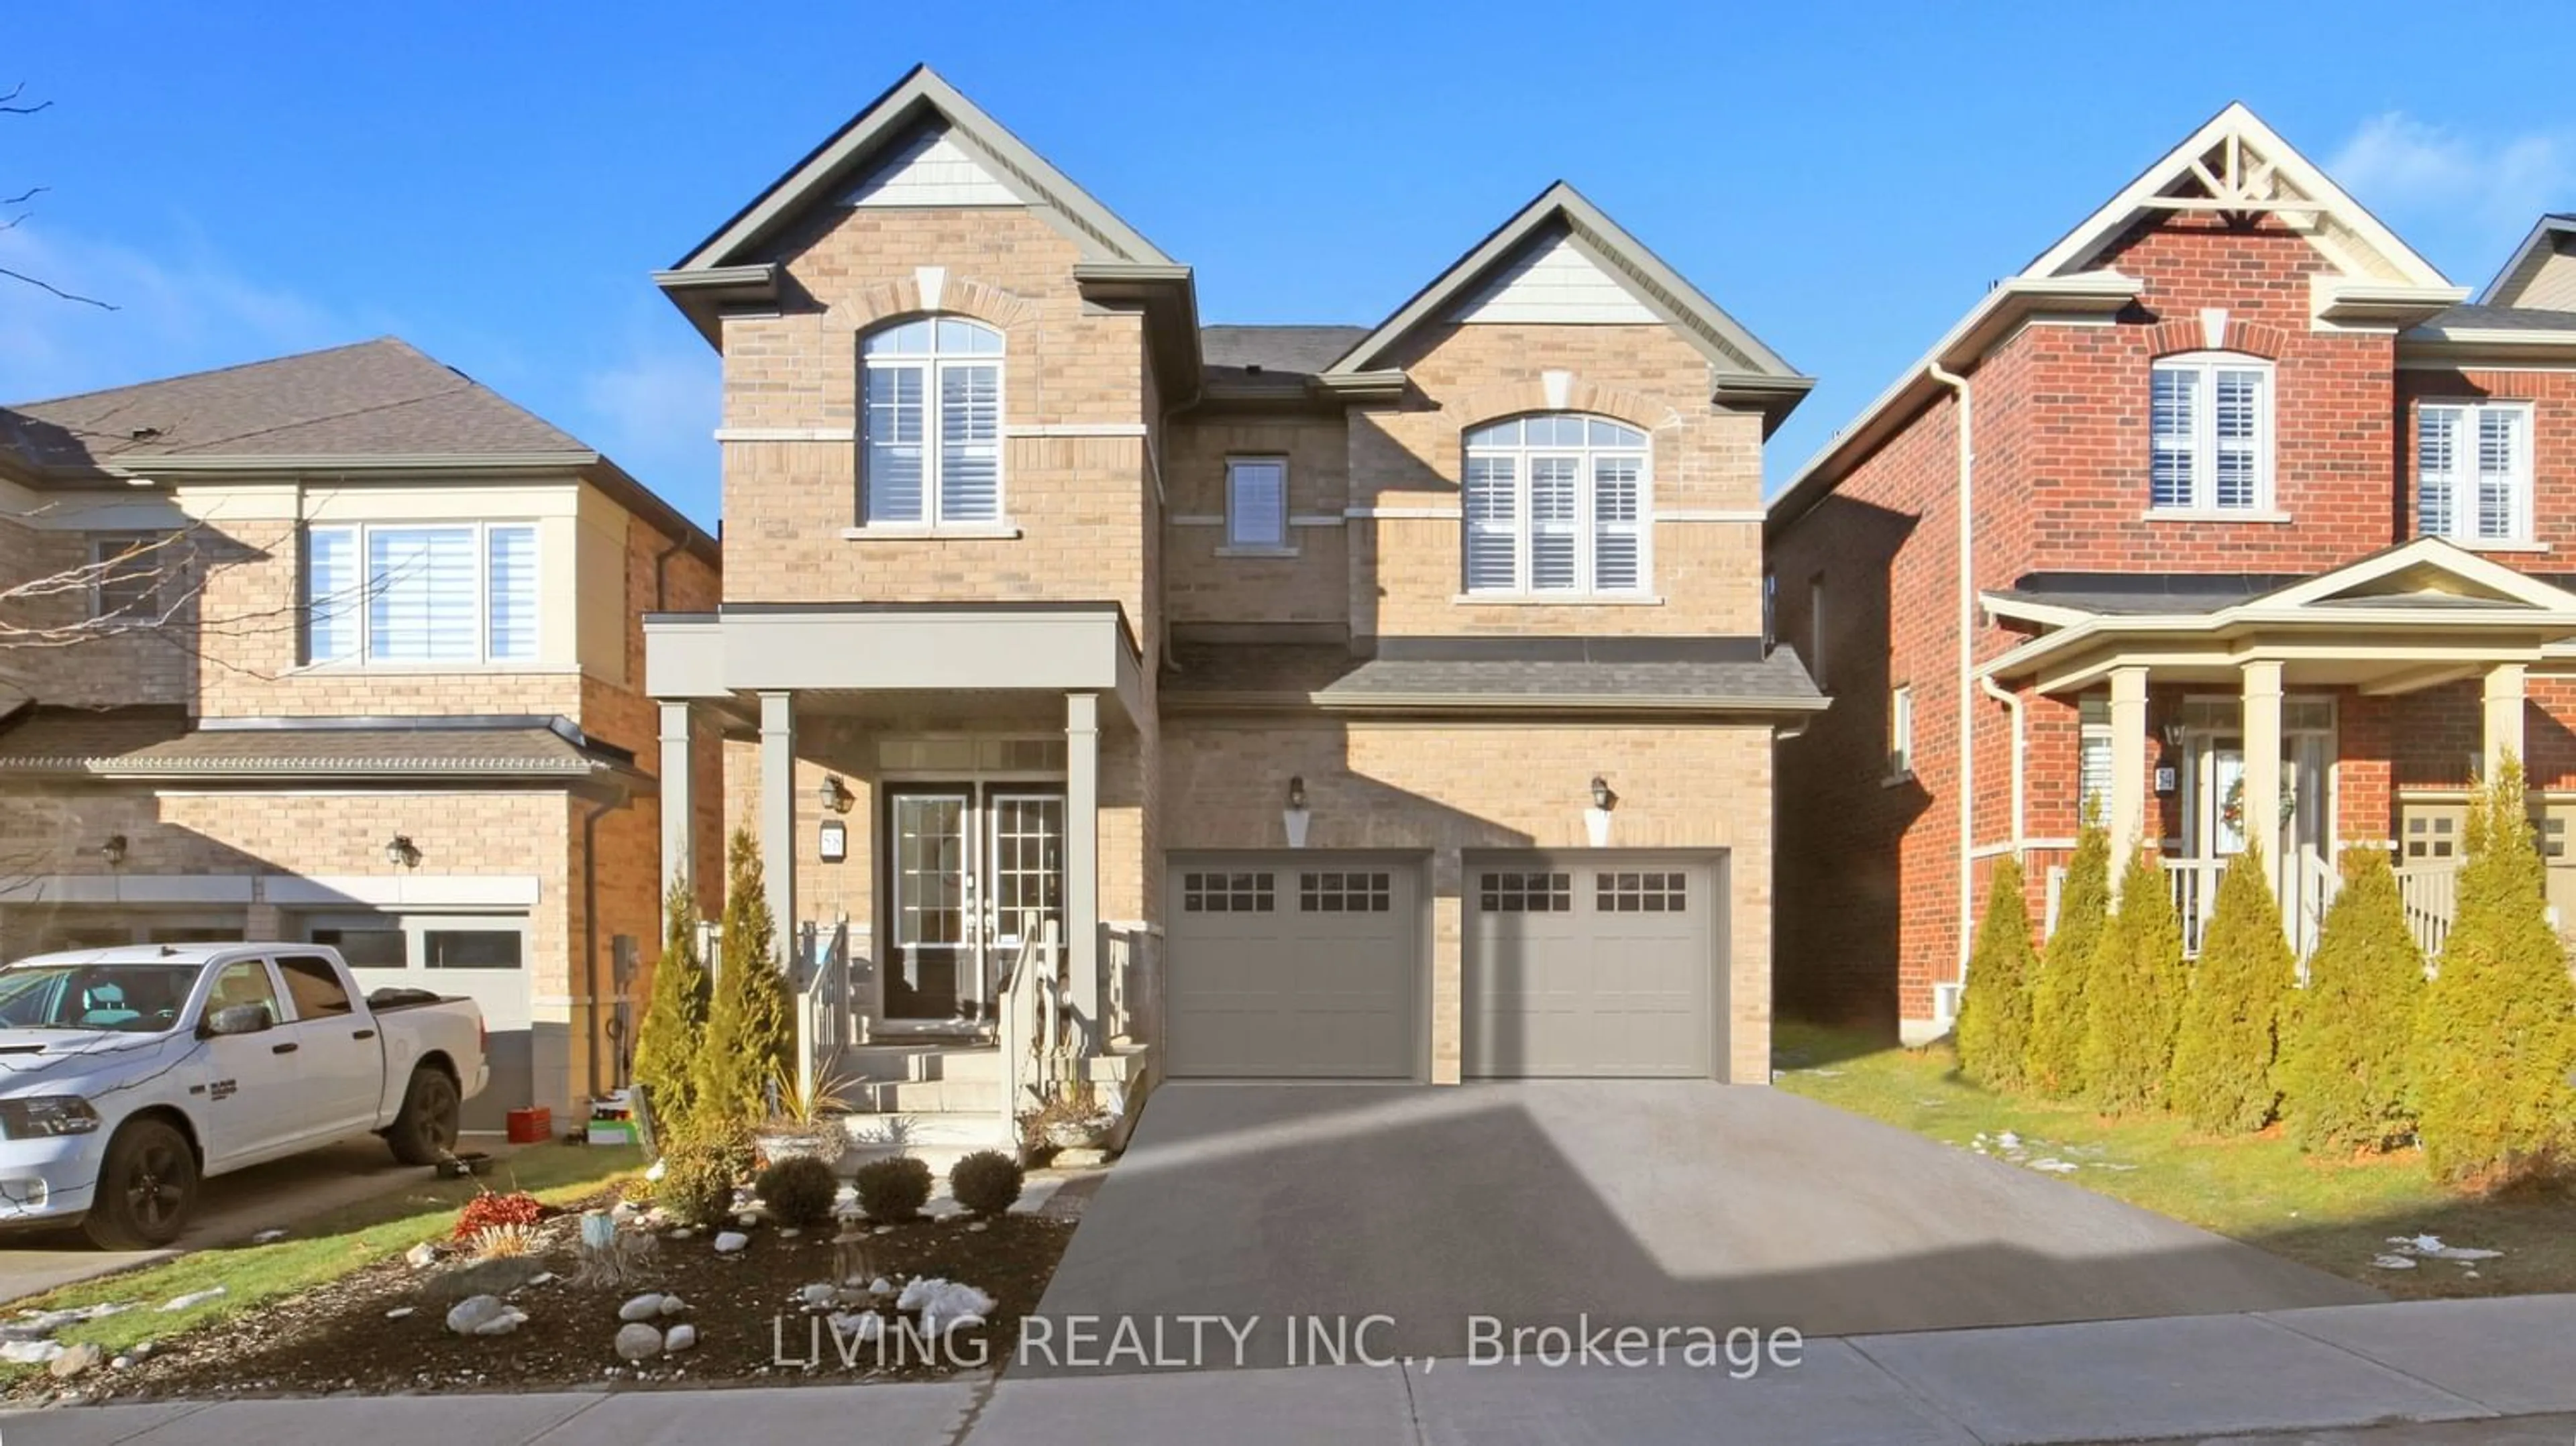 Home with brick exterior material for 58 Ben Sinclair Ave, East Gwillimbury Ontario L9N 0S2